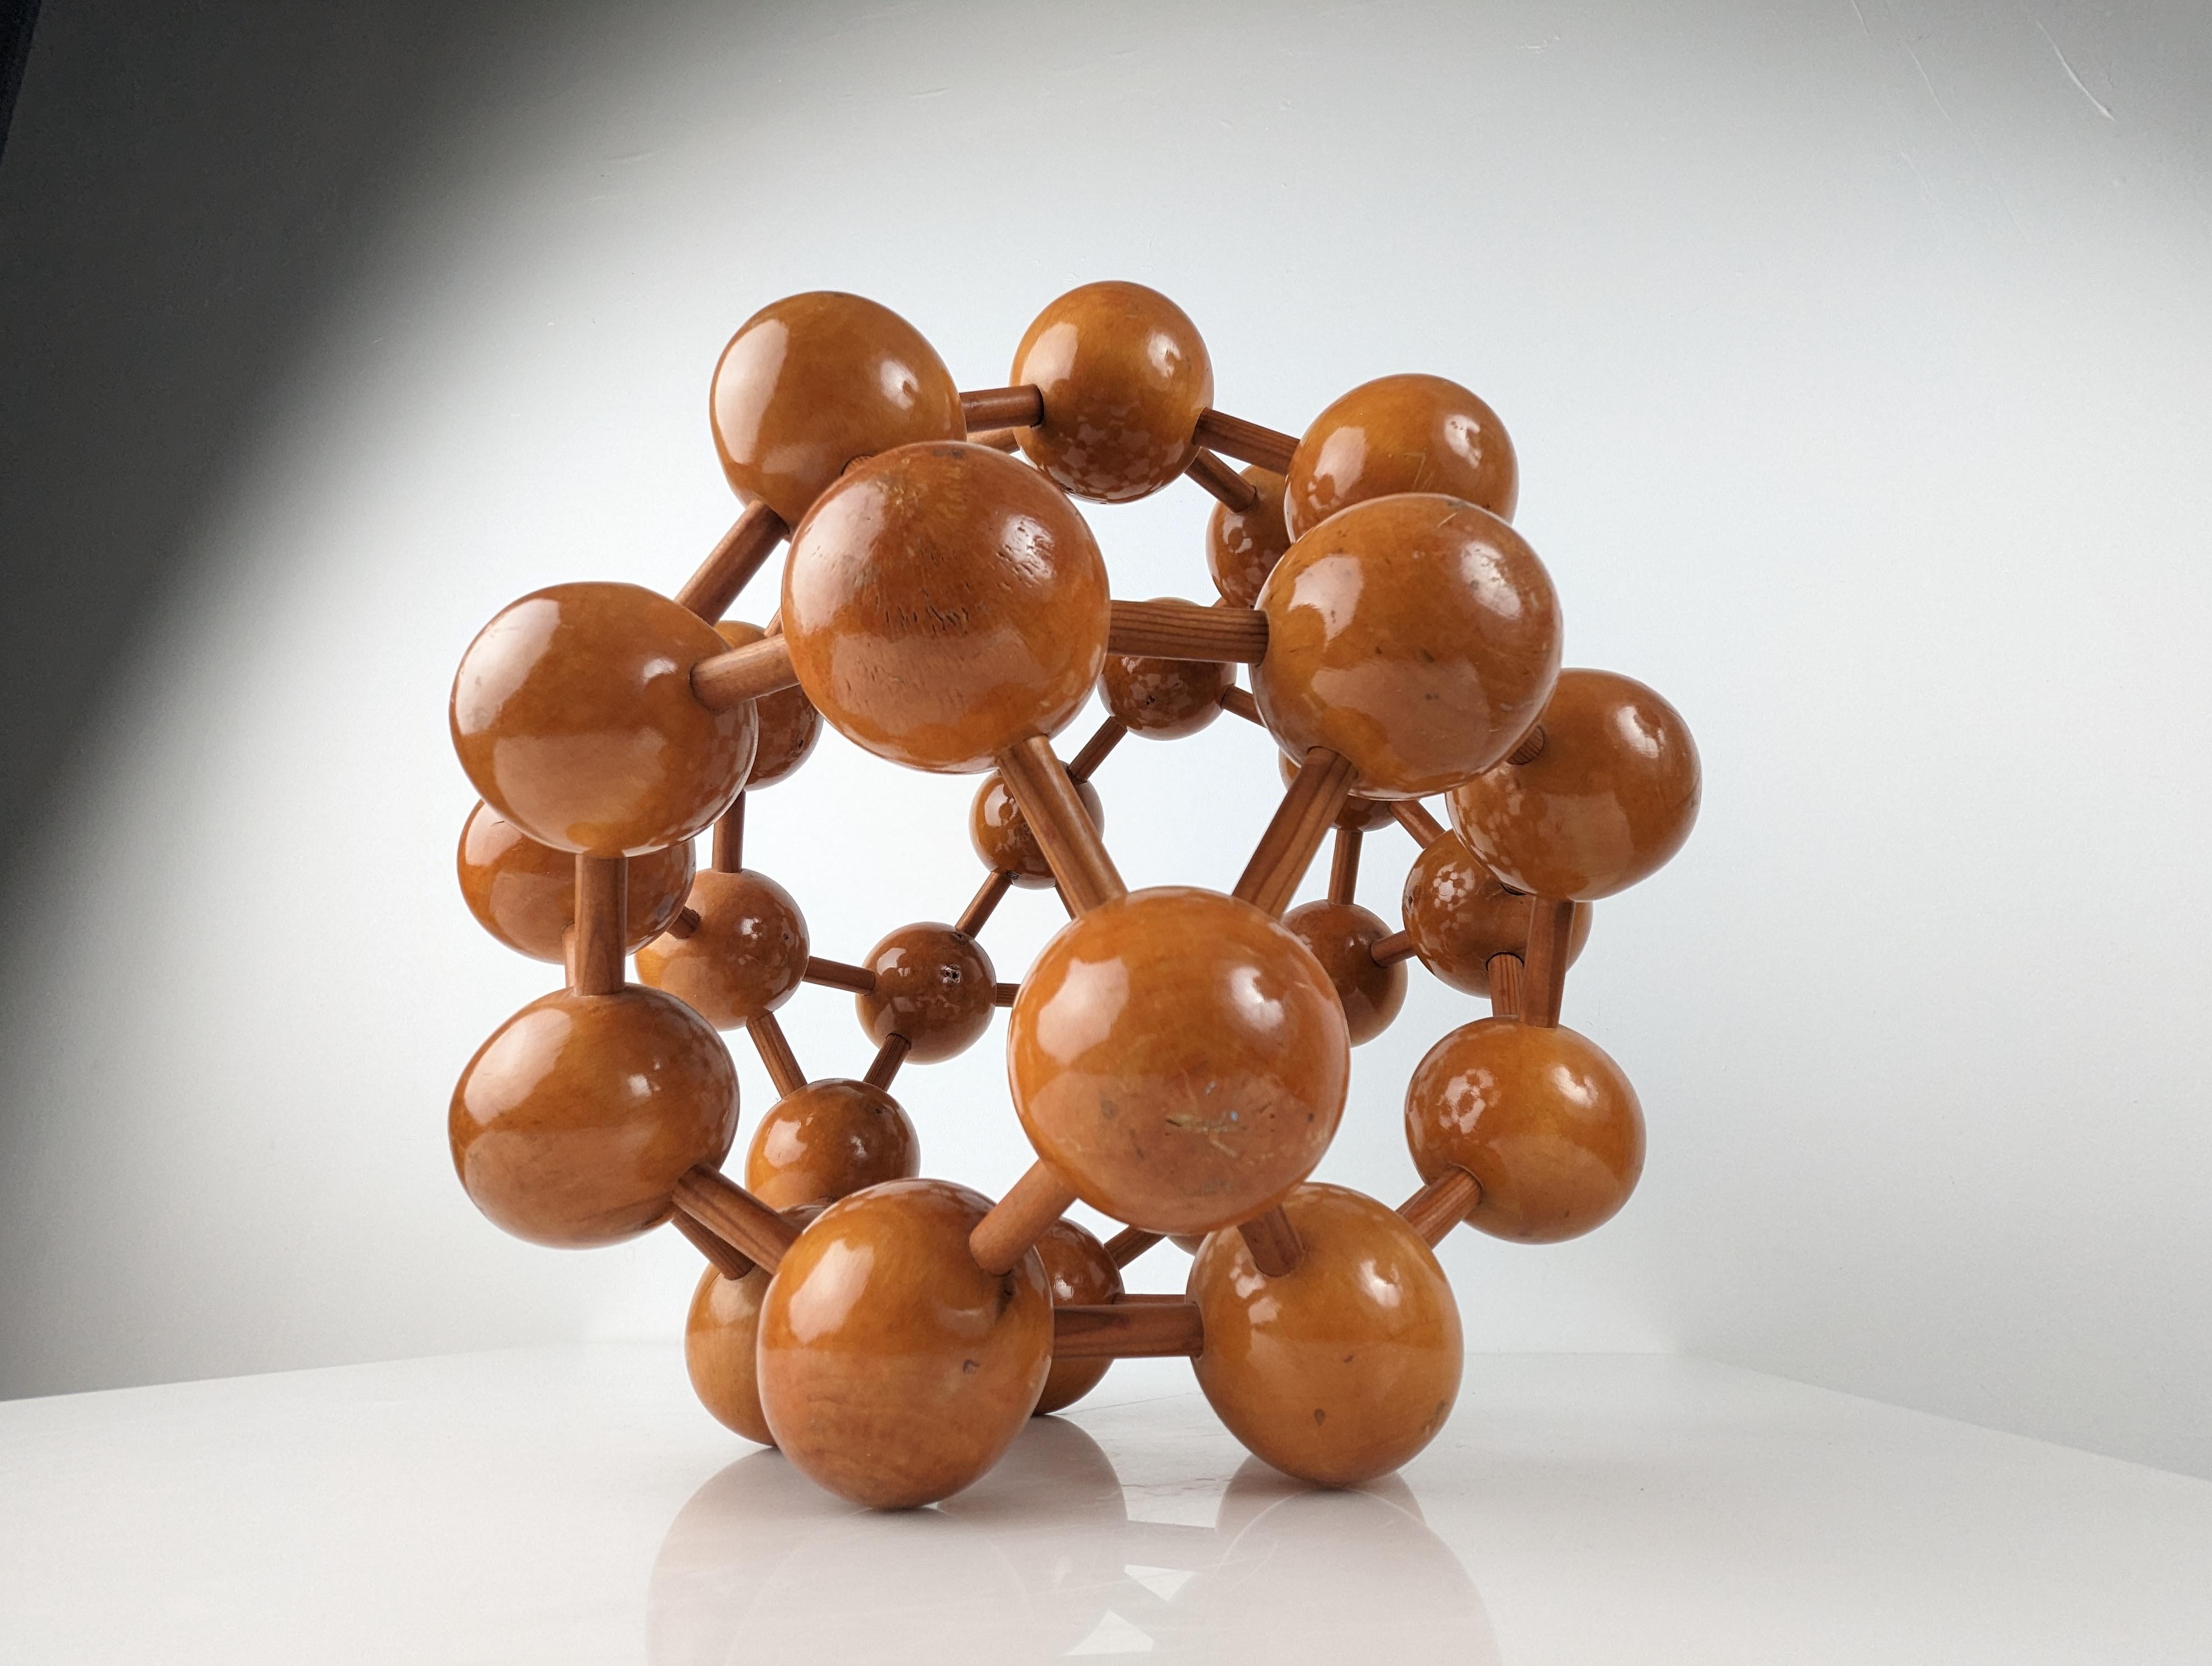 Hand-Crafted Big Mid-Century Modern Atomic Molecular Wood Sculpture, 1950s For Sale